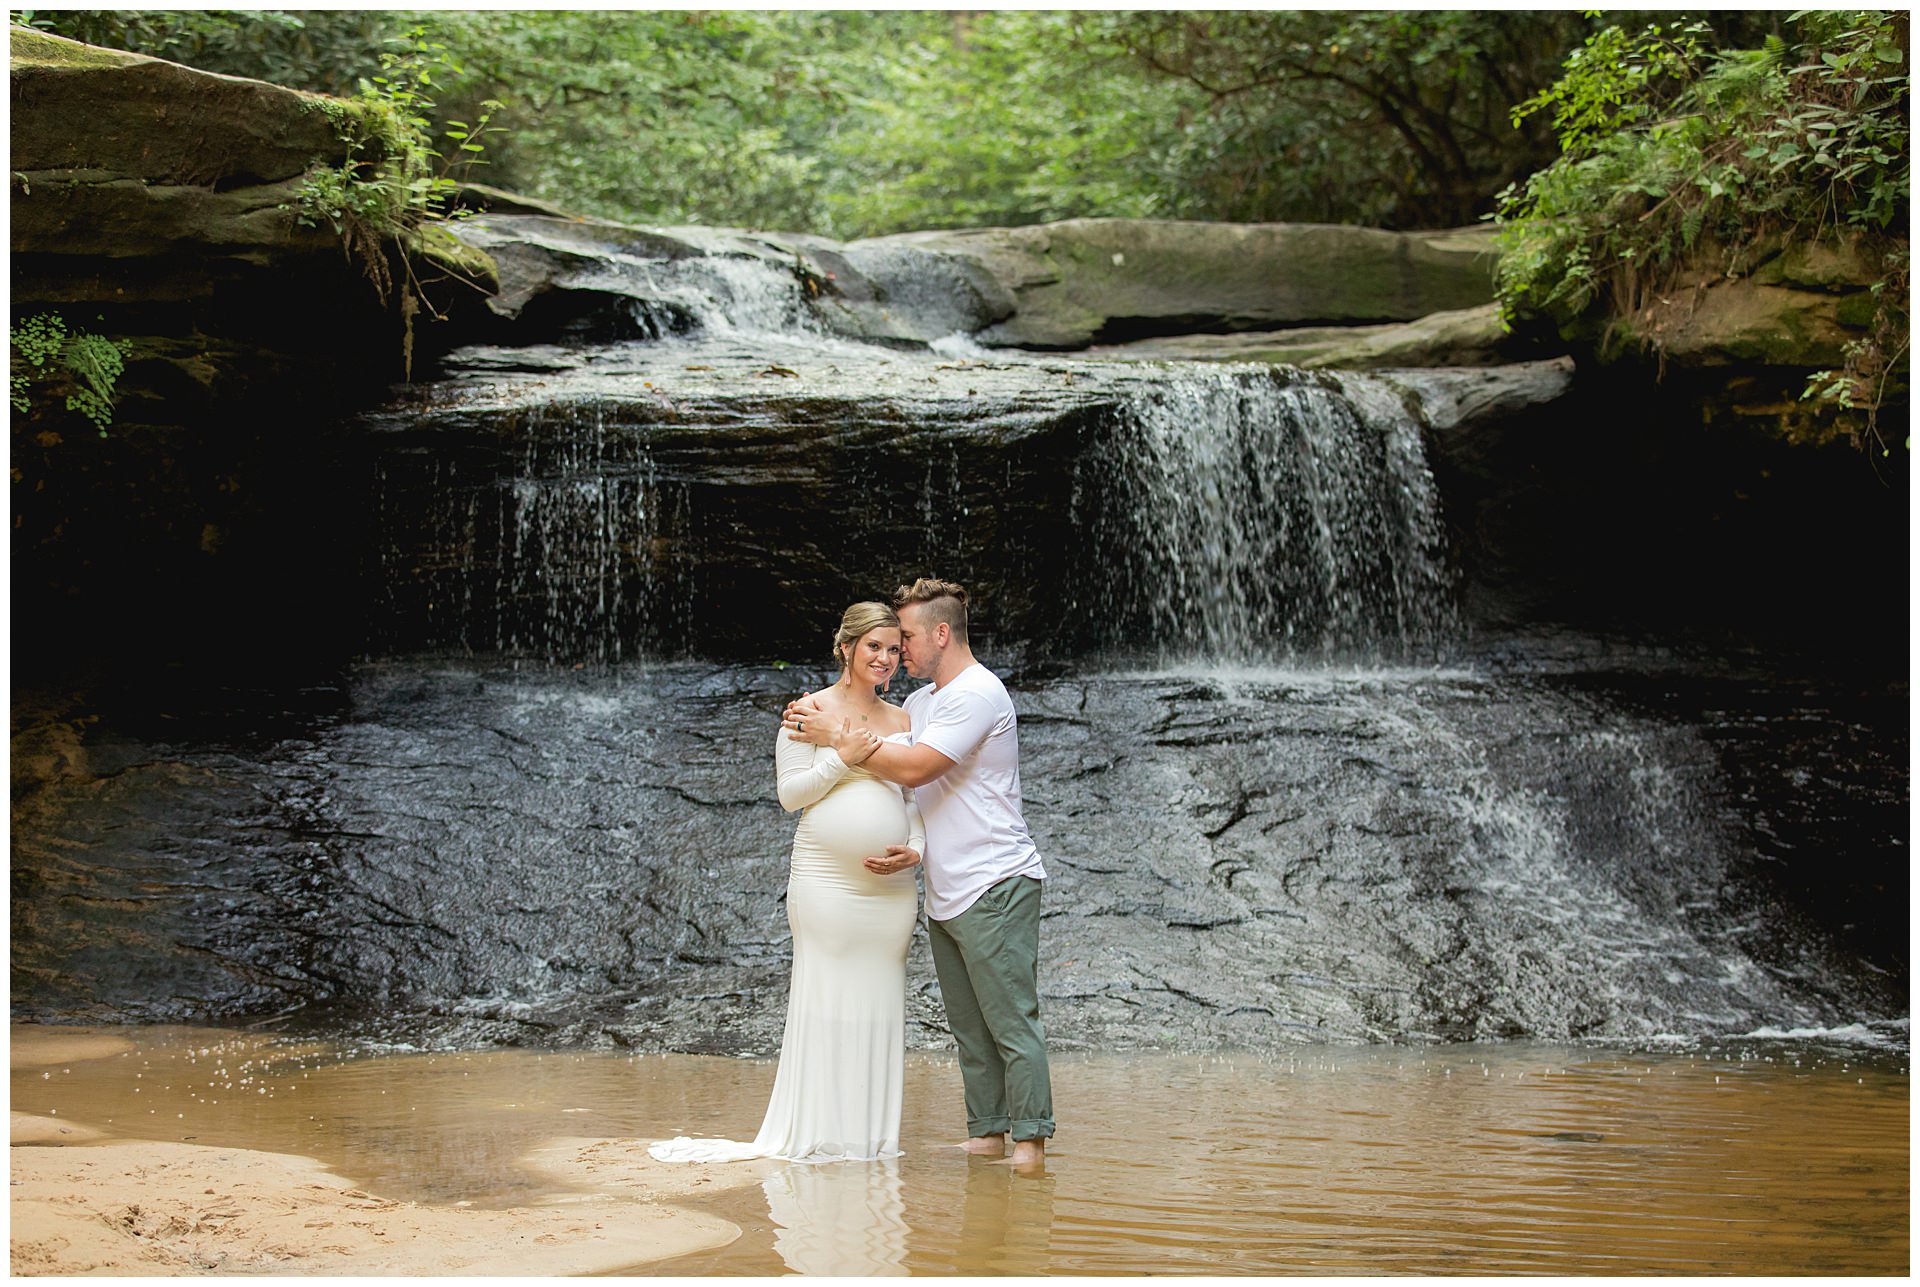 Maternity Session in the Red River Gorge at Creation Falls Waterfall